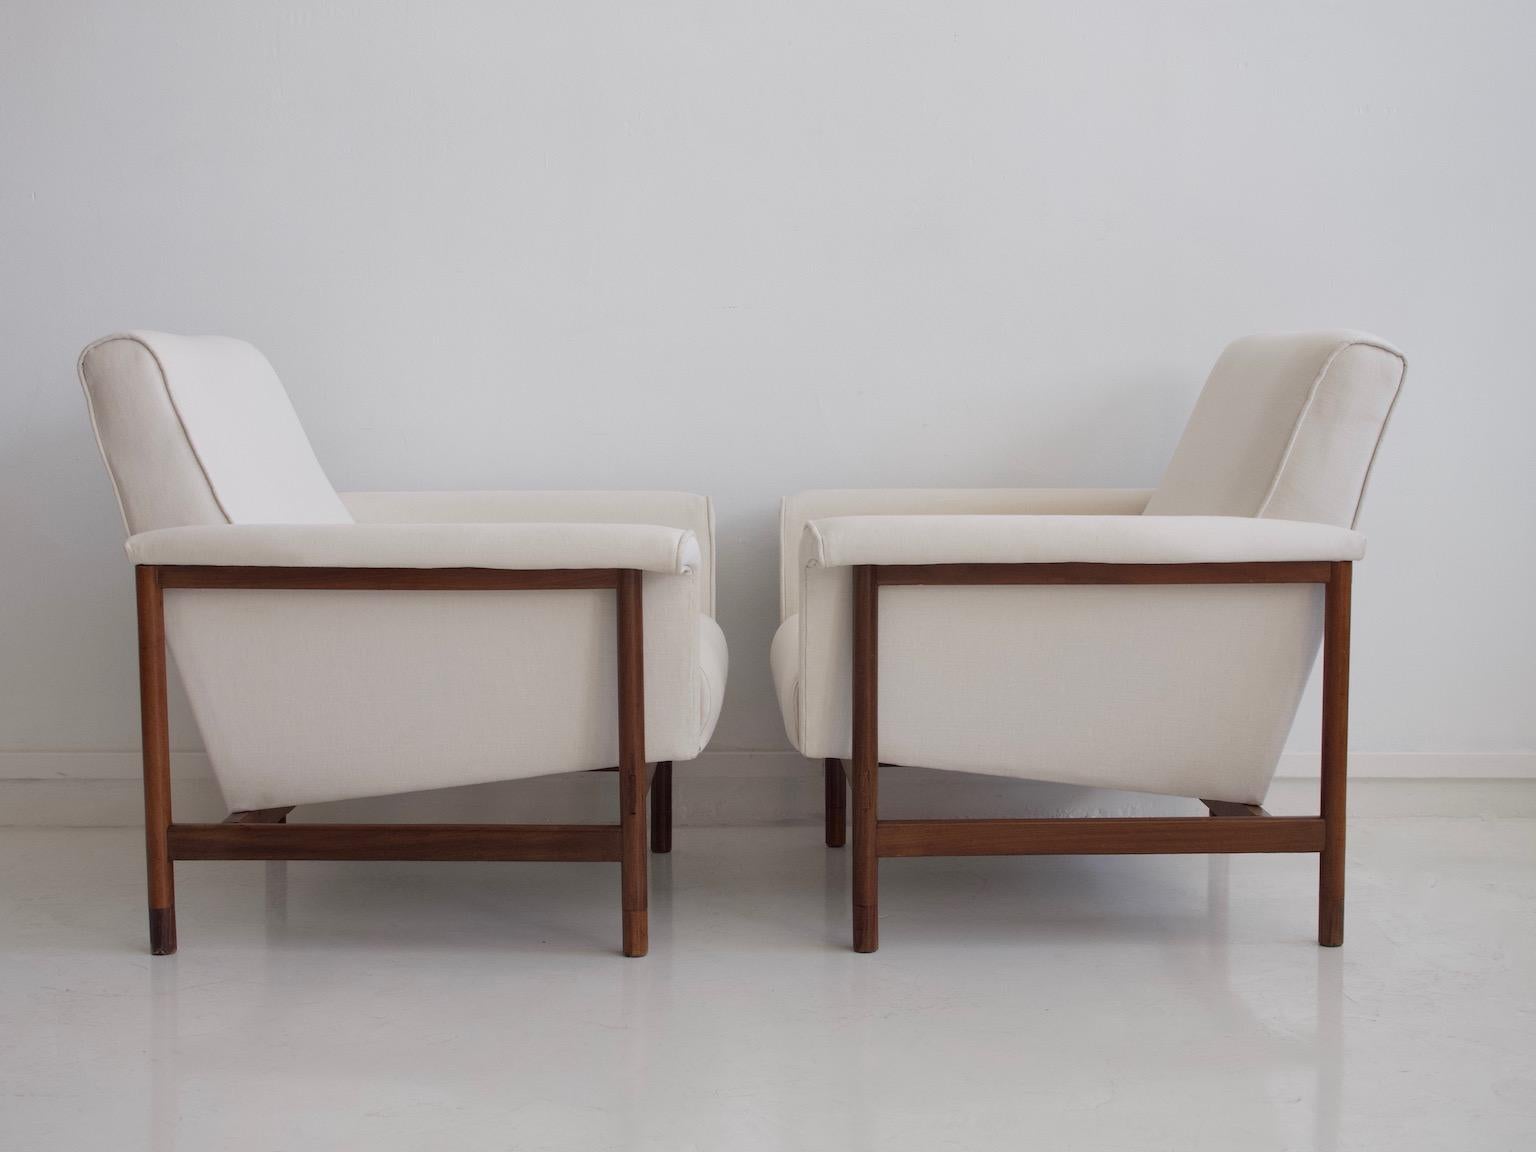 Pair of White Armchairs with Wooden Frame 1